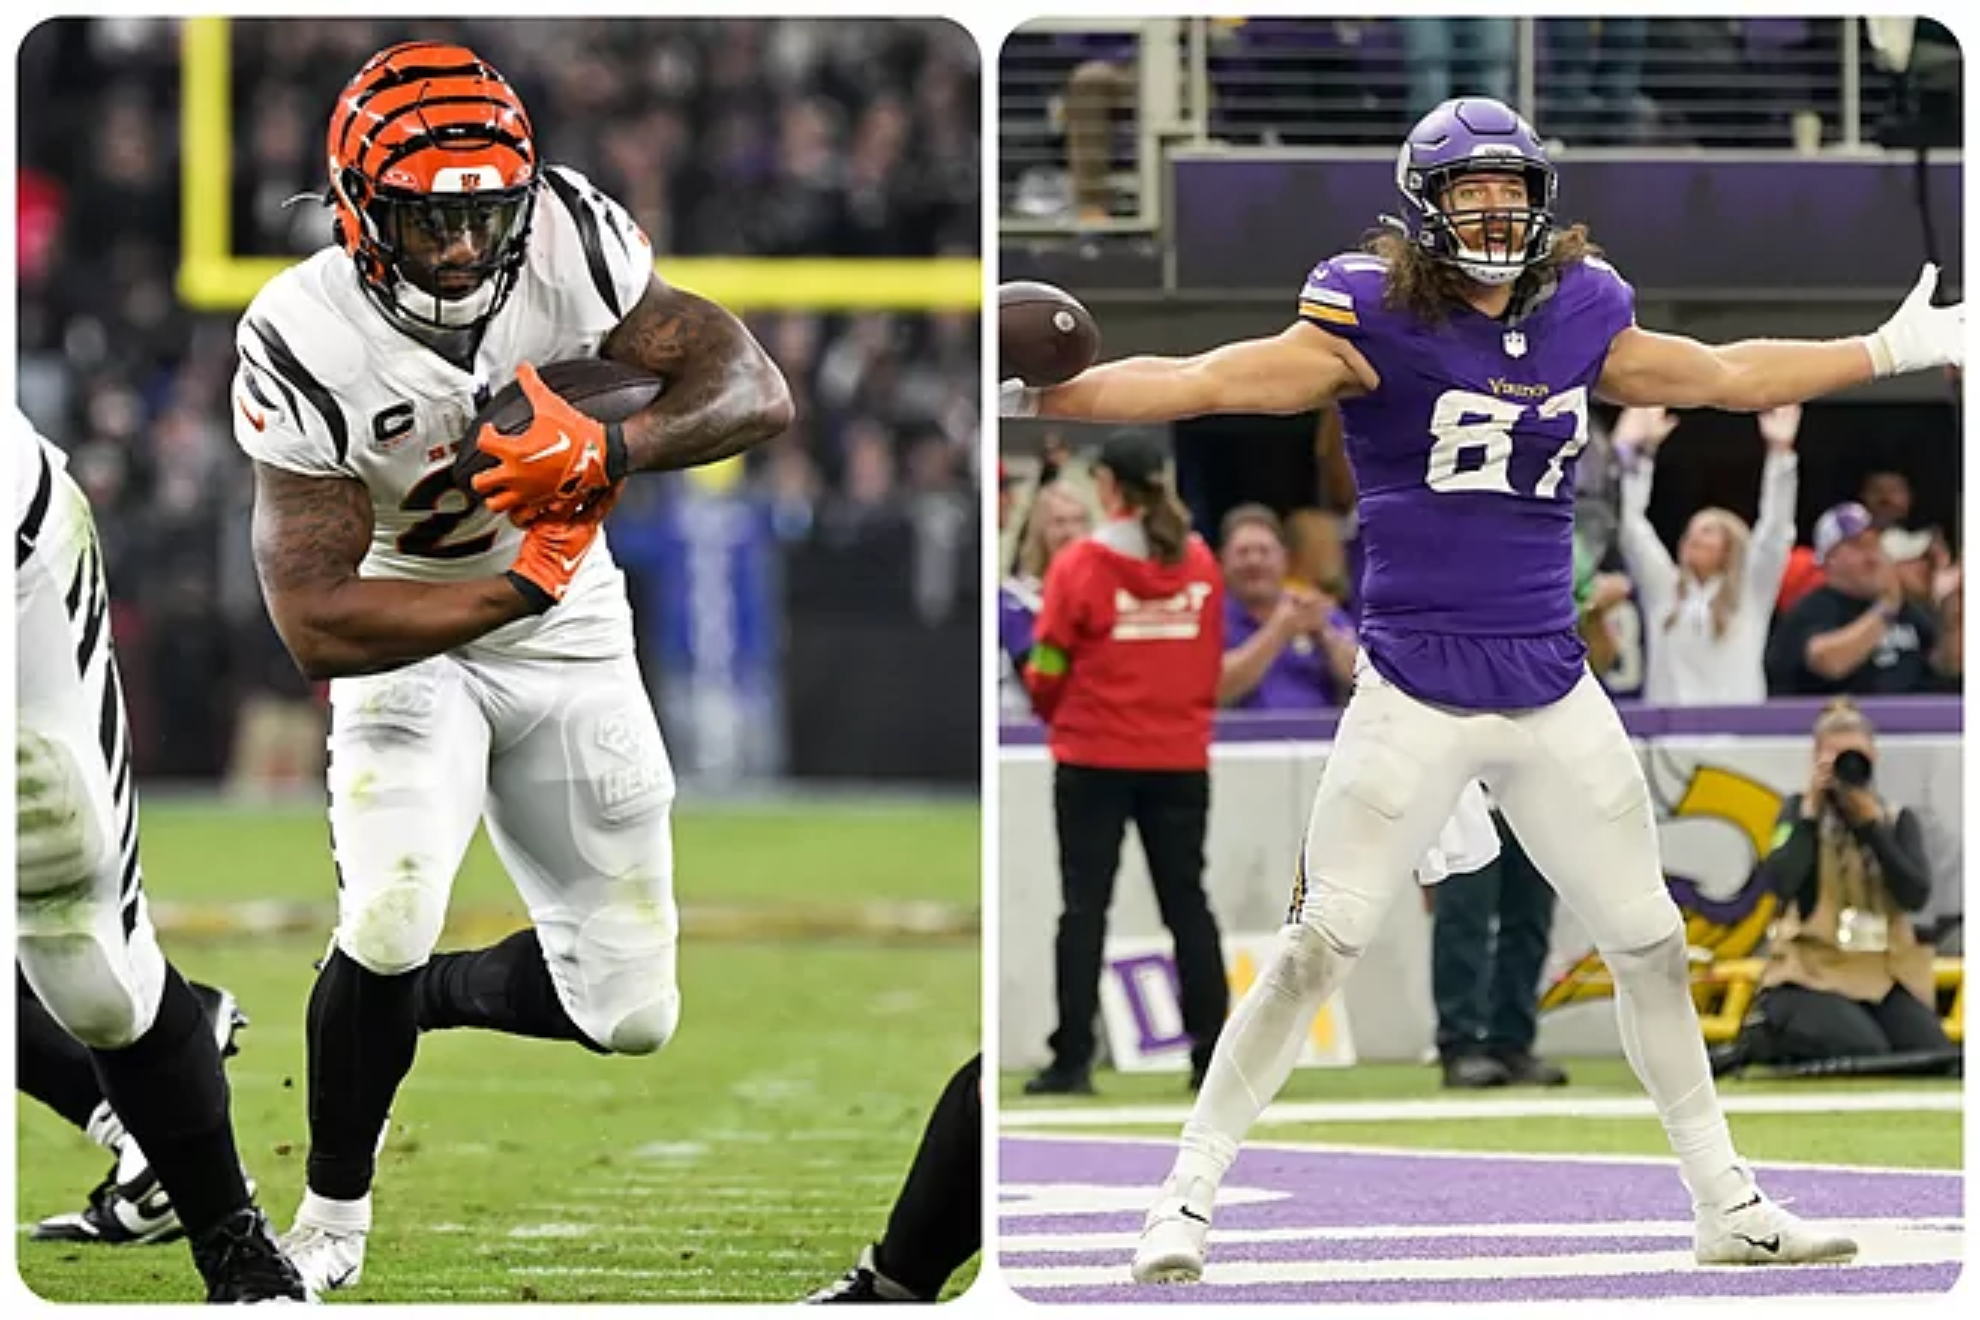 NFL Week 15: Vikings vs Bengals, where to watch, odds, injury report and more